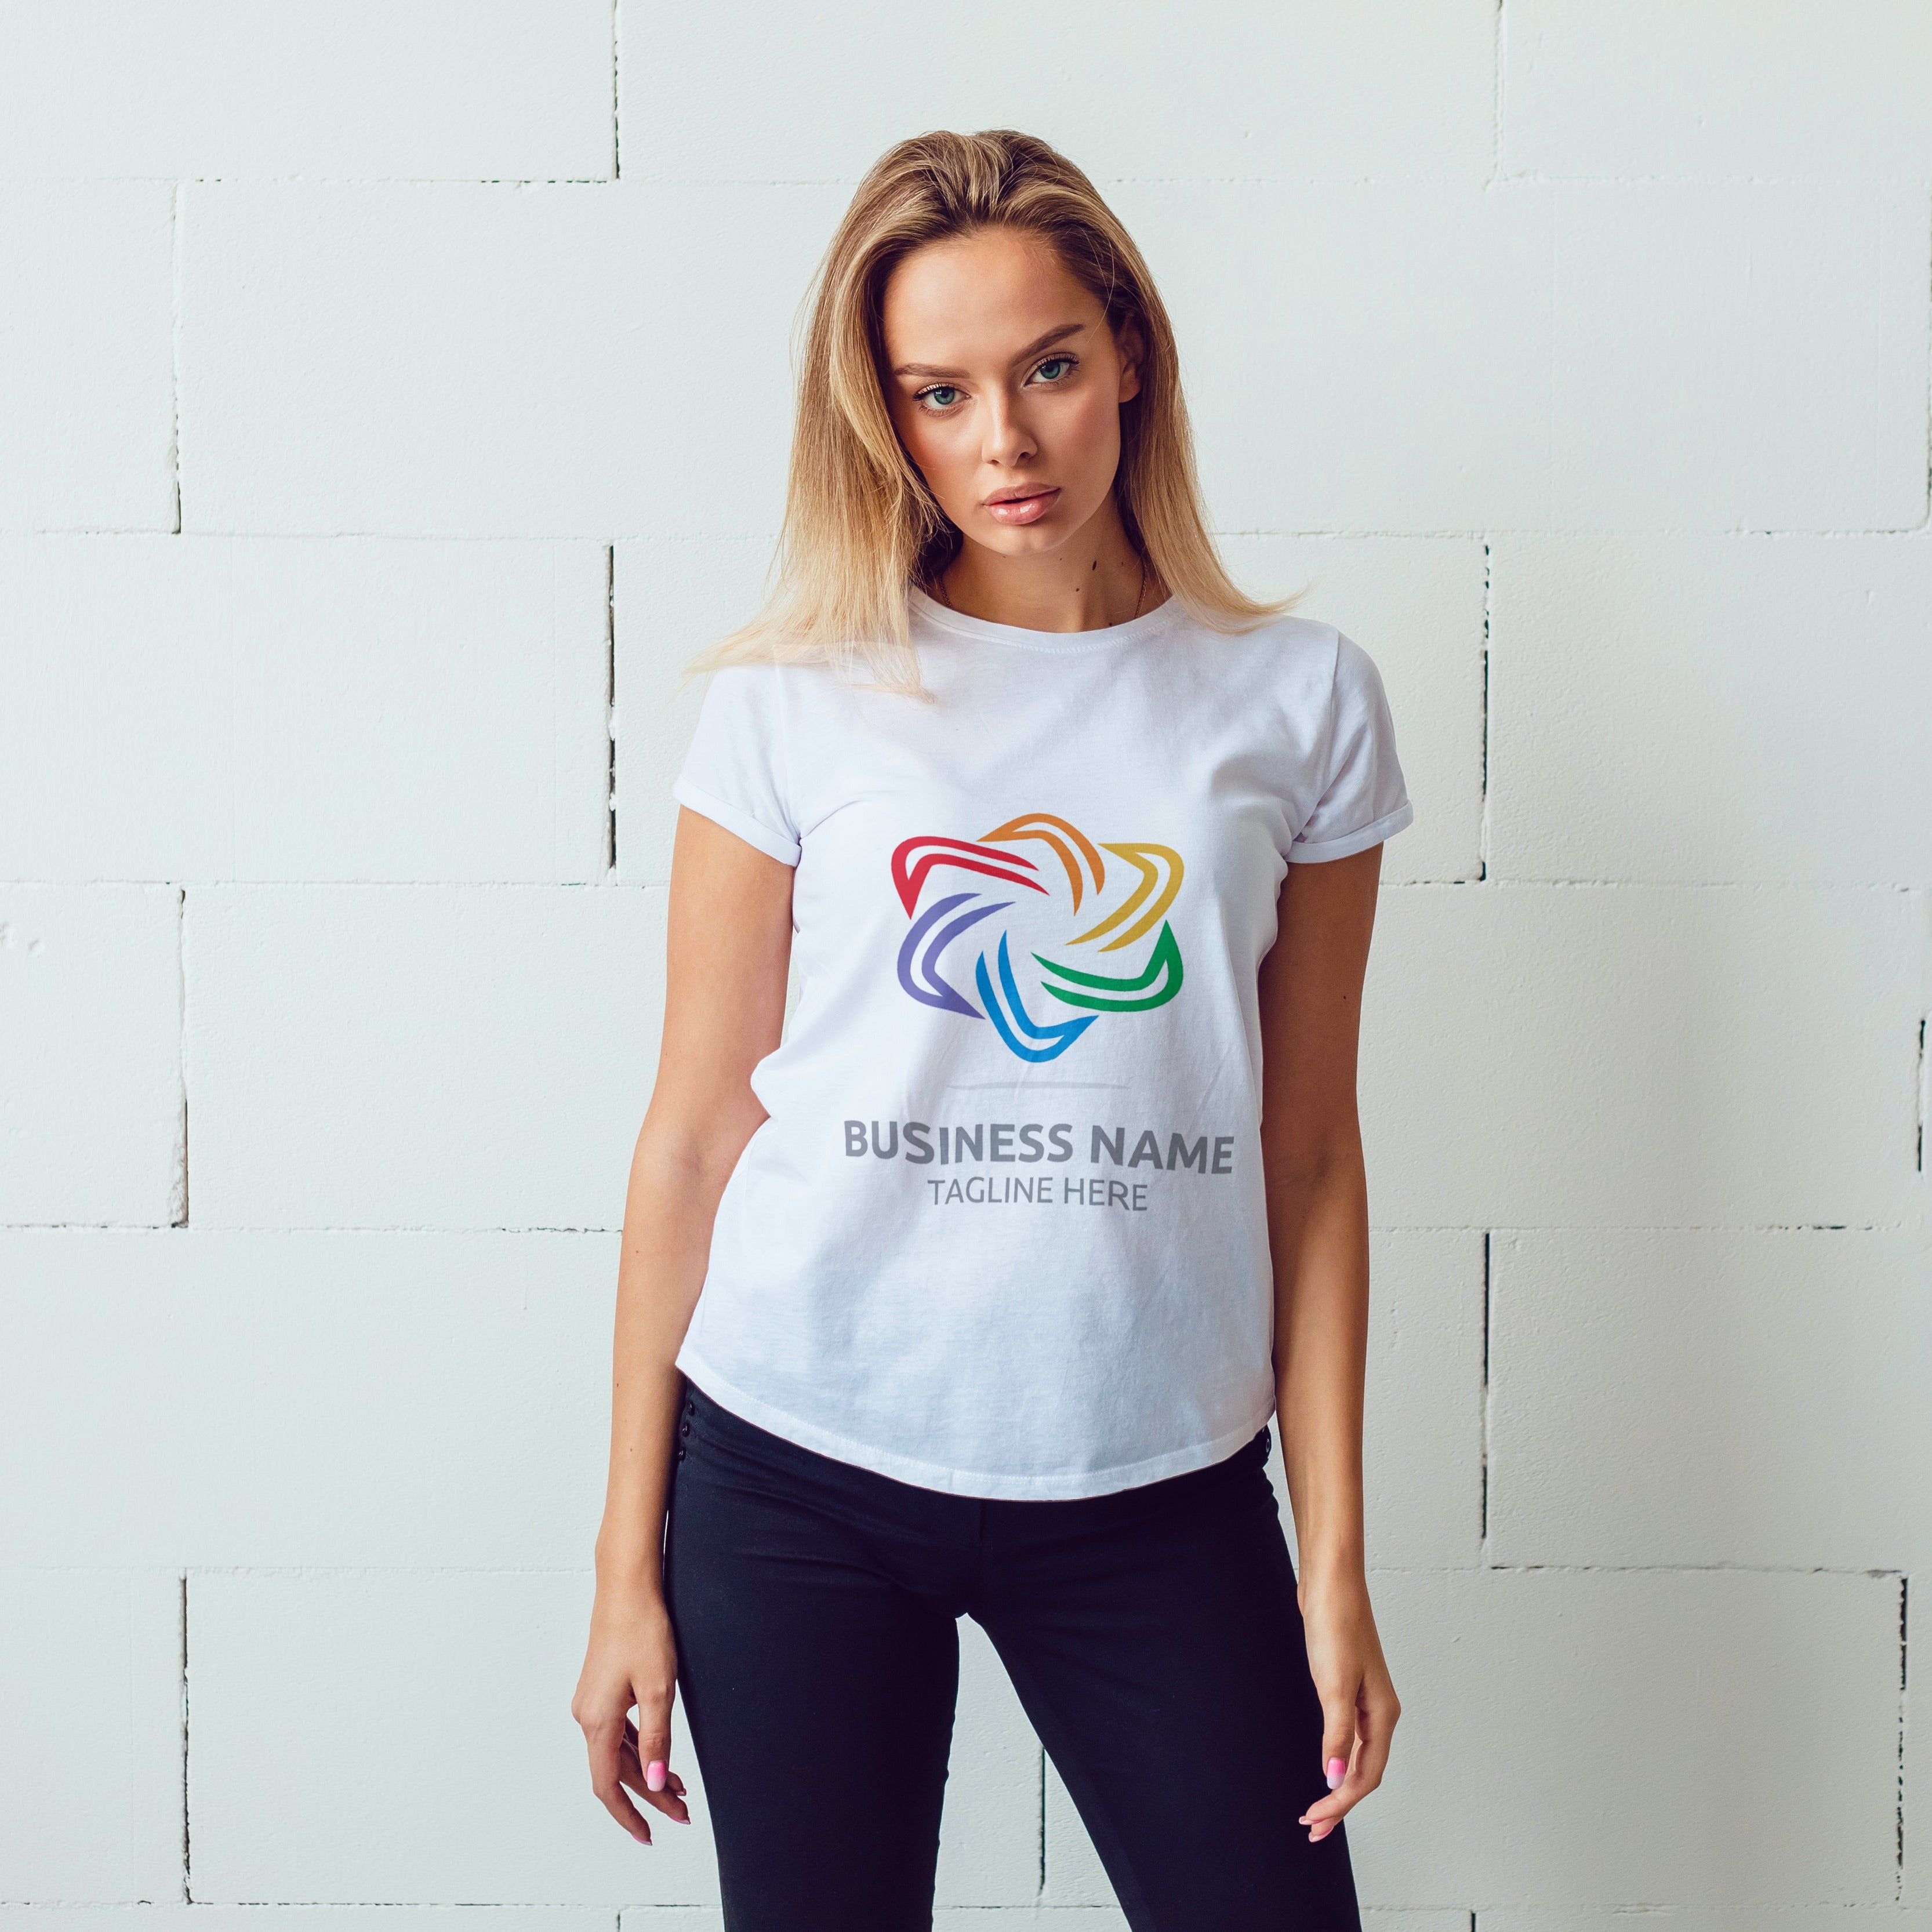 Printed Promotional T shirts for branding free product giveaway for corporate